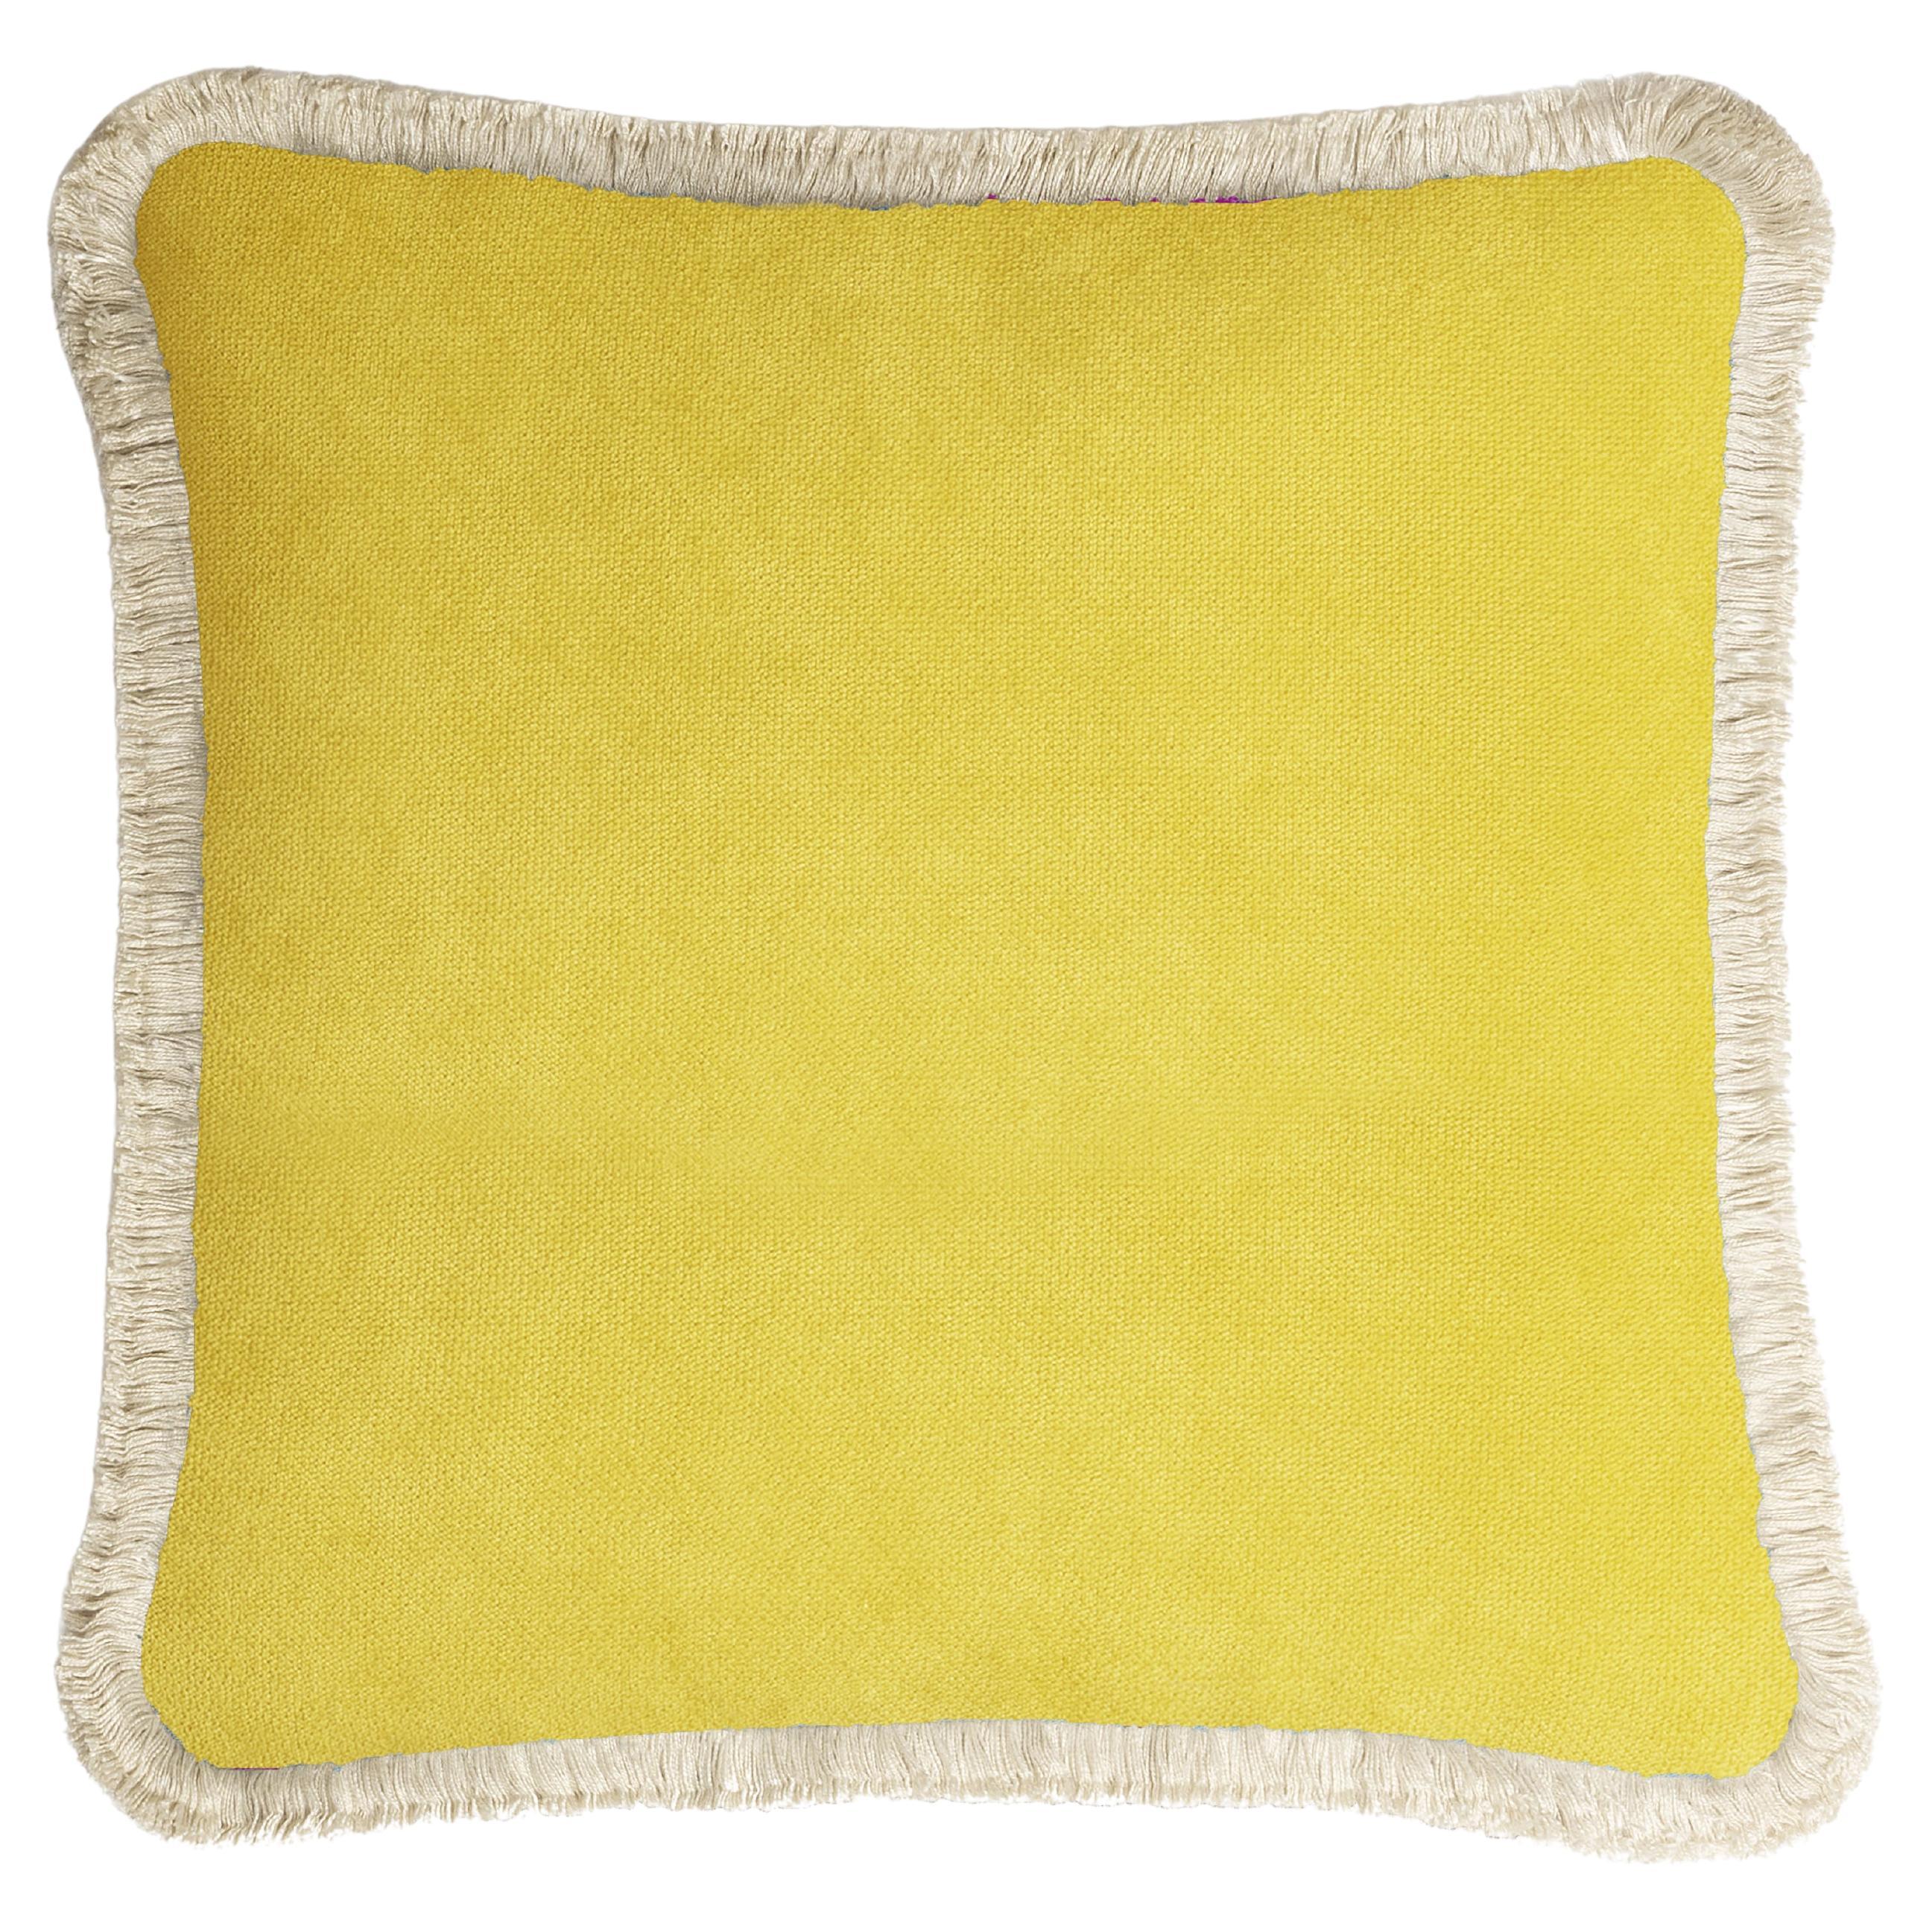 HAPPY PILLOW 40 Velvet Yellow with Cream Fringes For Sale